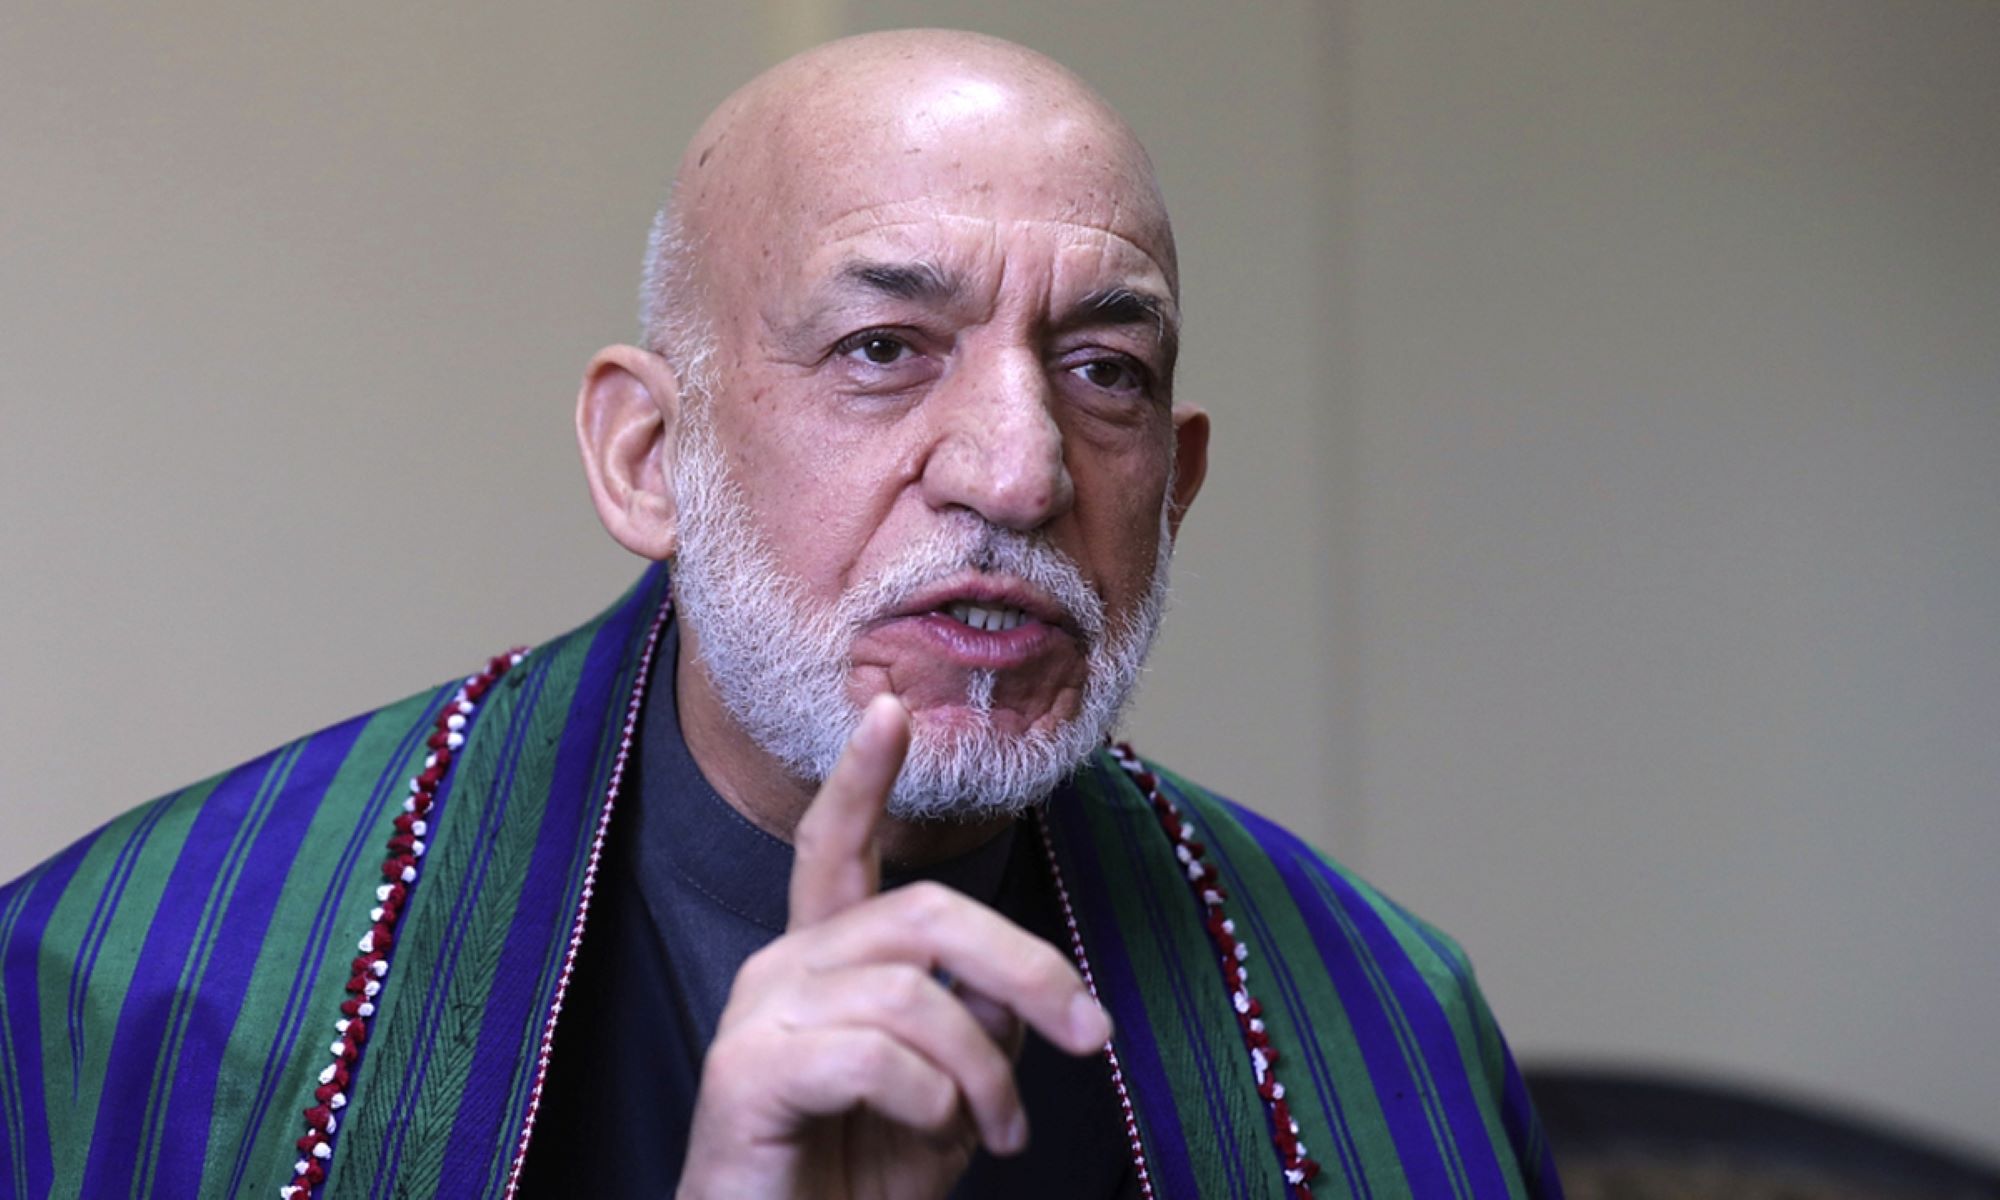 10 Fascinating Facts About Hamid Karzai - Facts.net